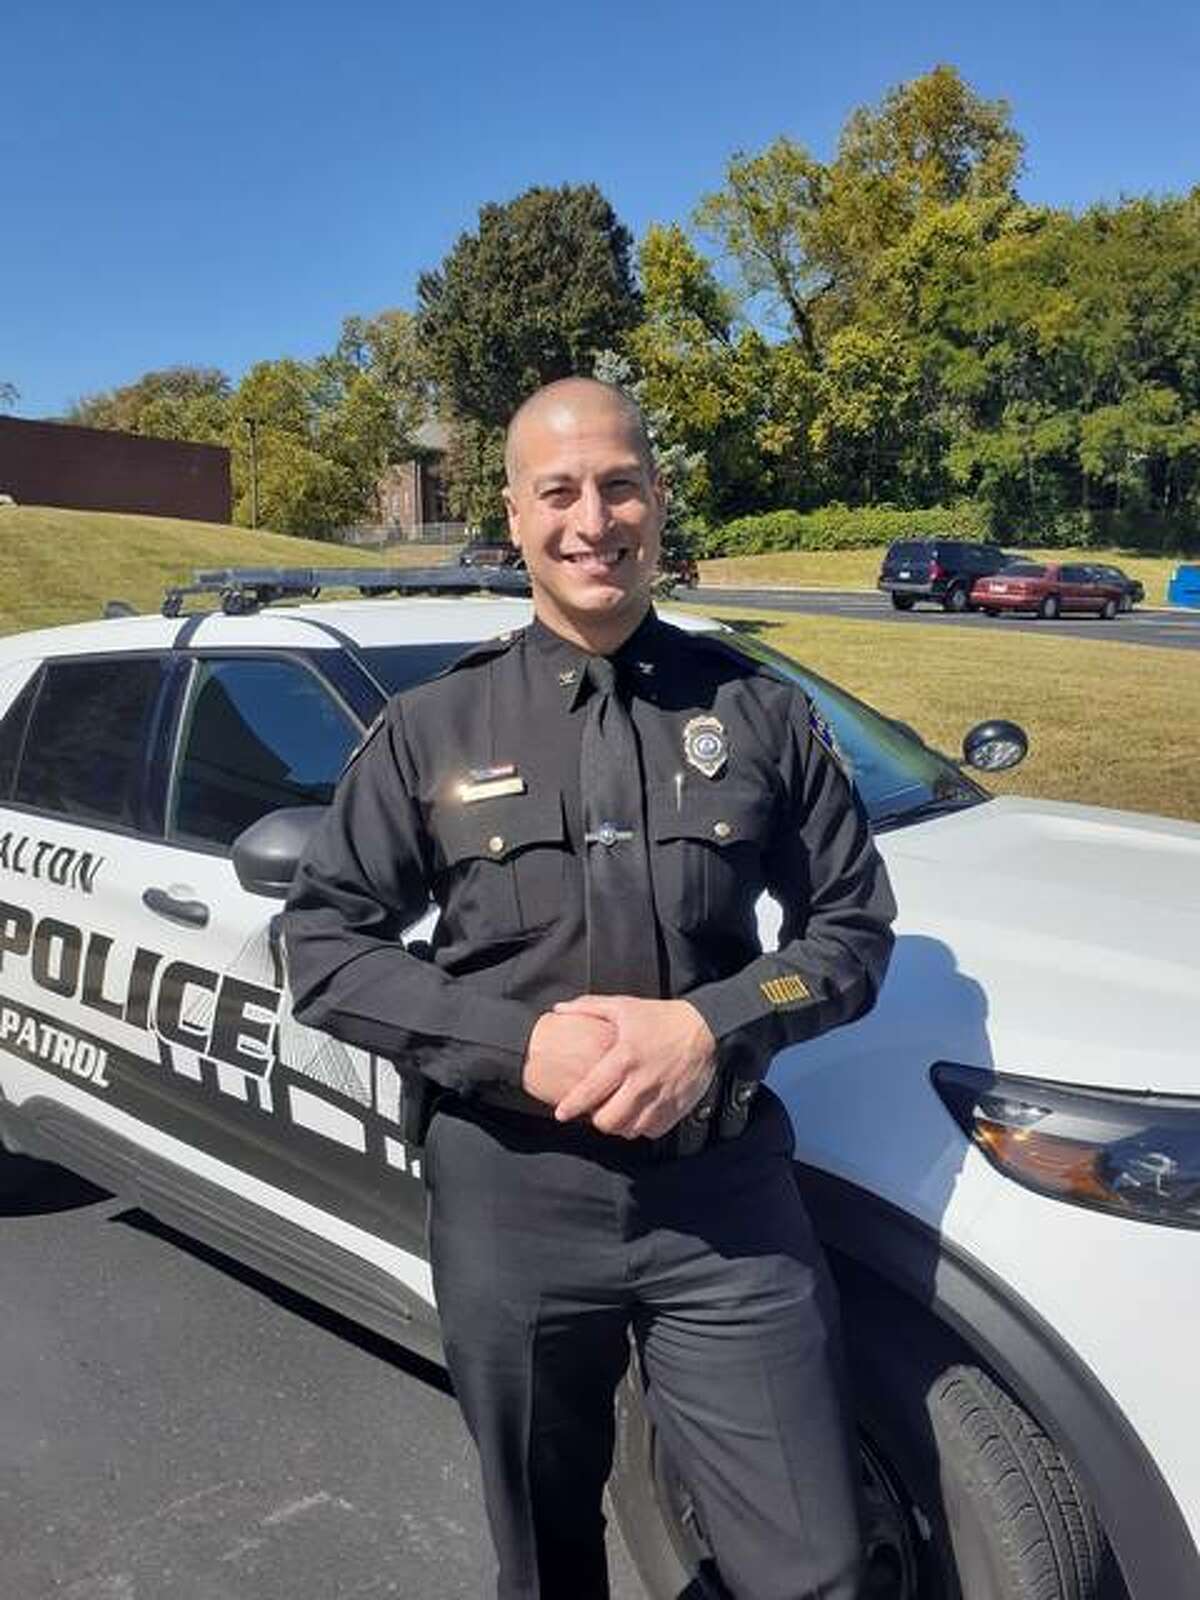 Alton Police Chief Pulido said he knew when he was 16 that he wanted to become a police officer. In 2001, he joined the Alton Police force that he now directs.